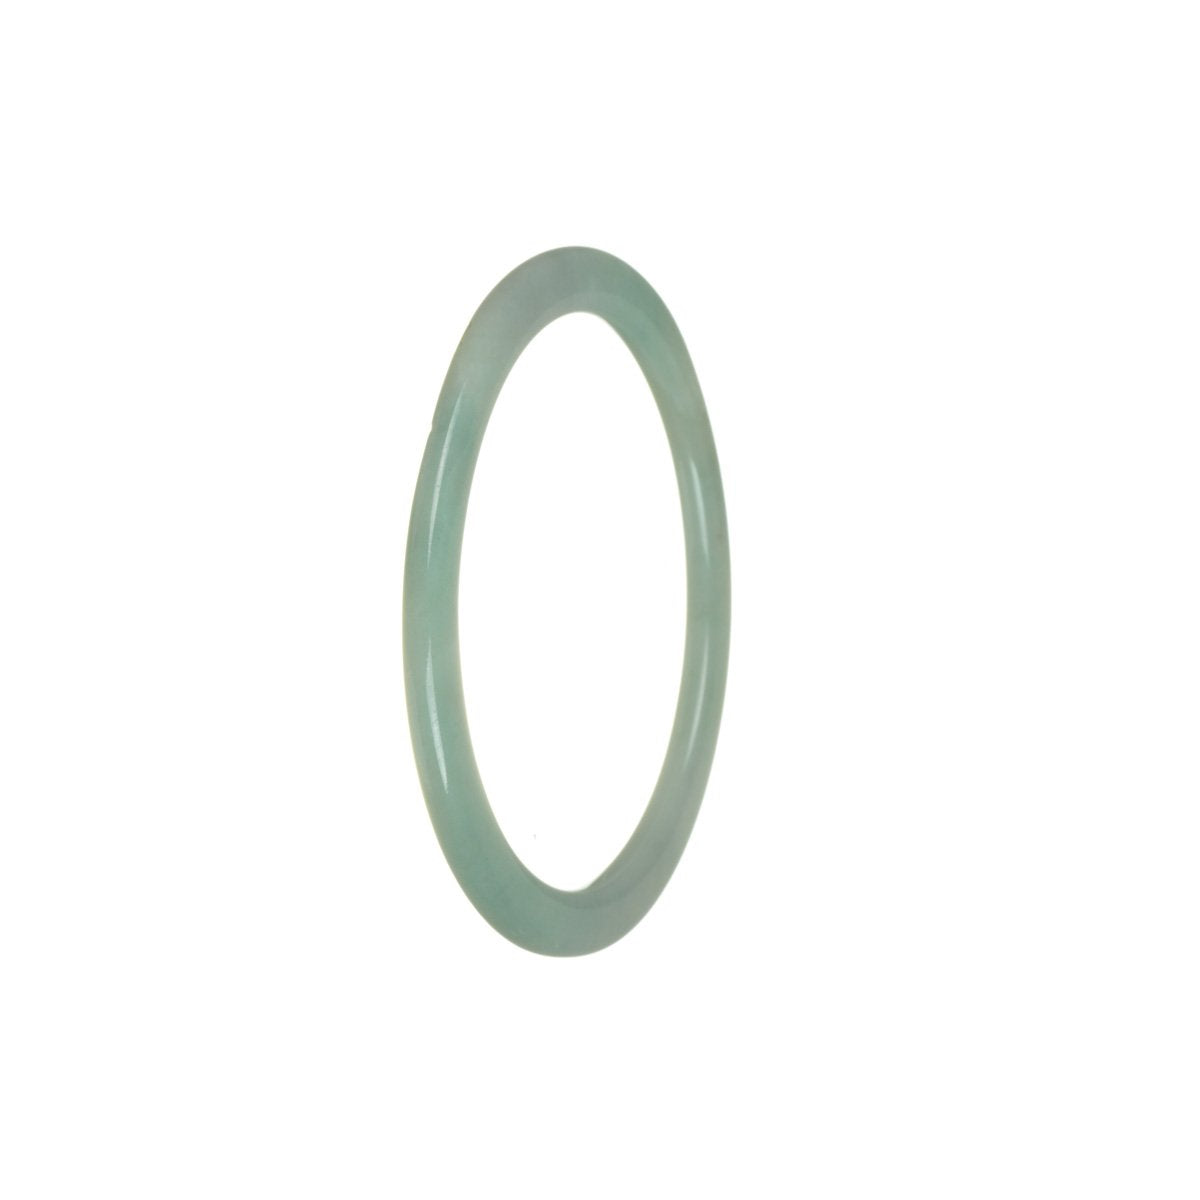 A close-up image of a thin, green traditional jade bracelet crafted with genuine grade A jade. The bracelet measures 54mm in size and features a smooth, polished surface.